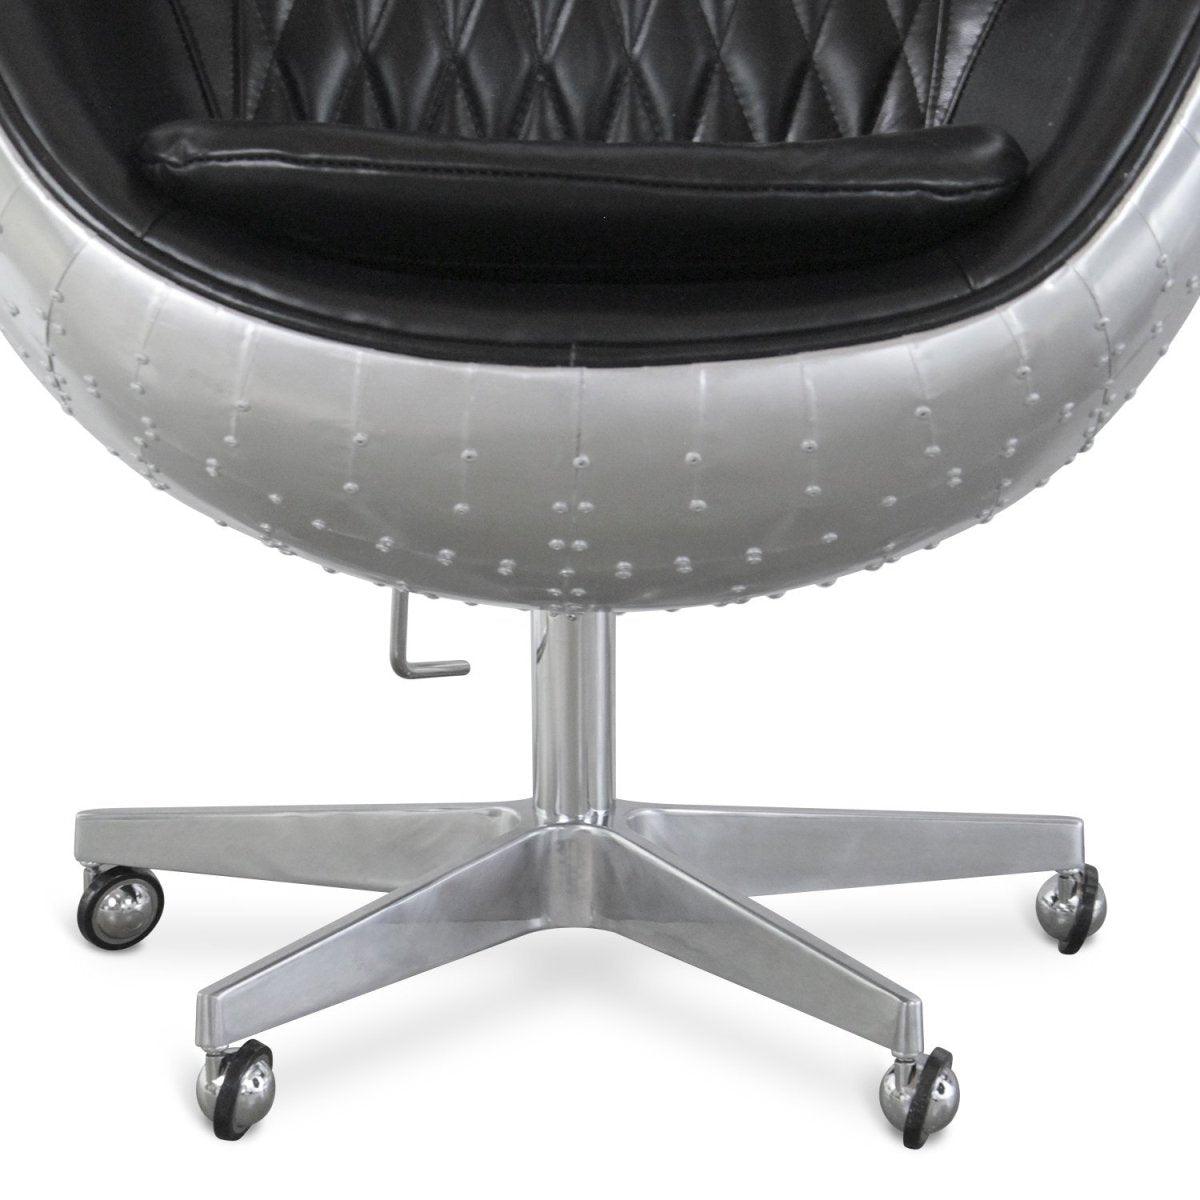 https://knoxdeco.com/cdn/shop/products/aviator-egg-office-chair-aluminum-black-leather-swivel-casters-rustic-deco-475658.jpg?v=1648700434